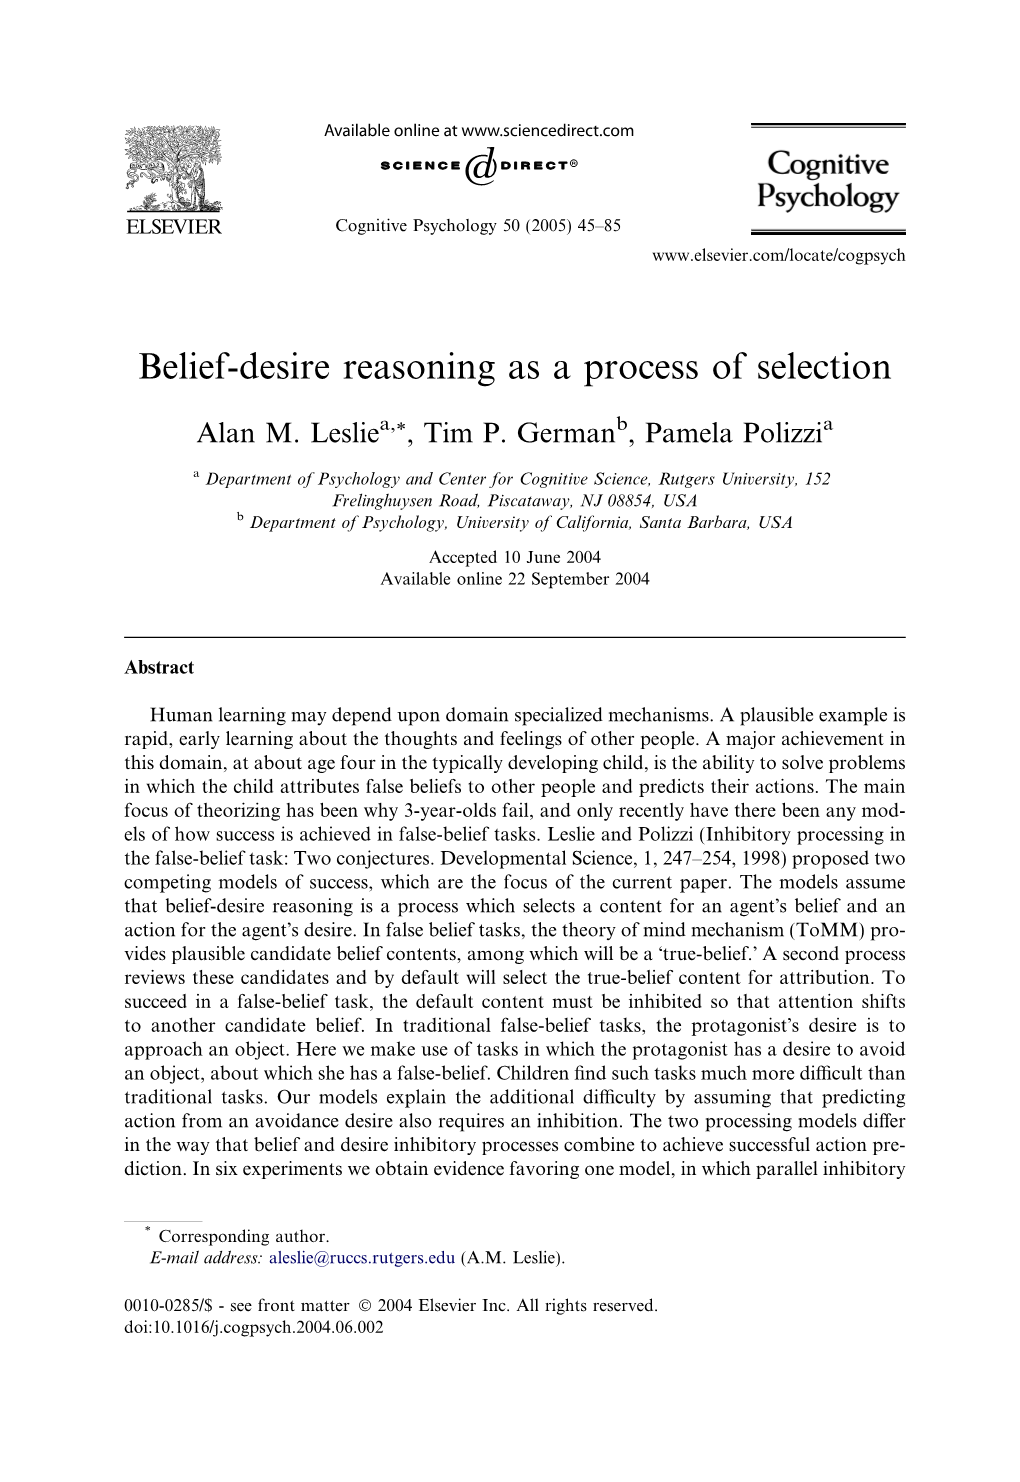 Belief-Desire Reasoning As a Process of Selection